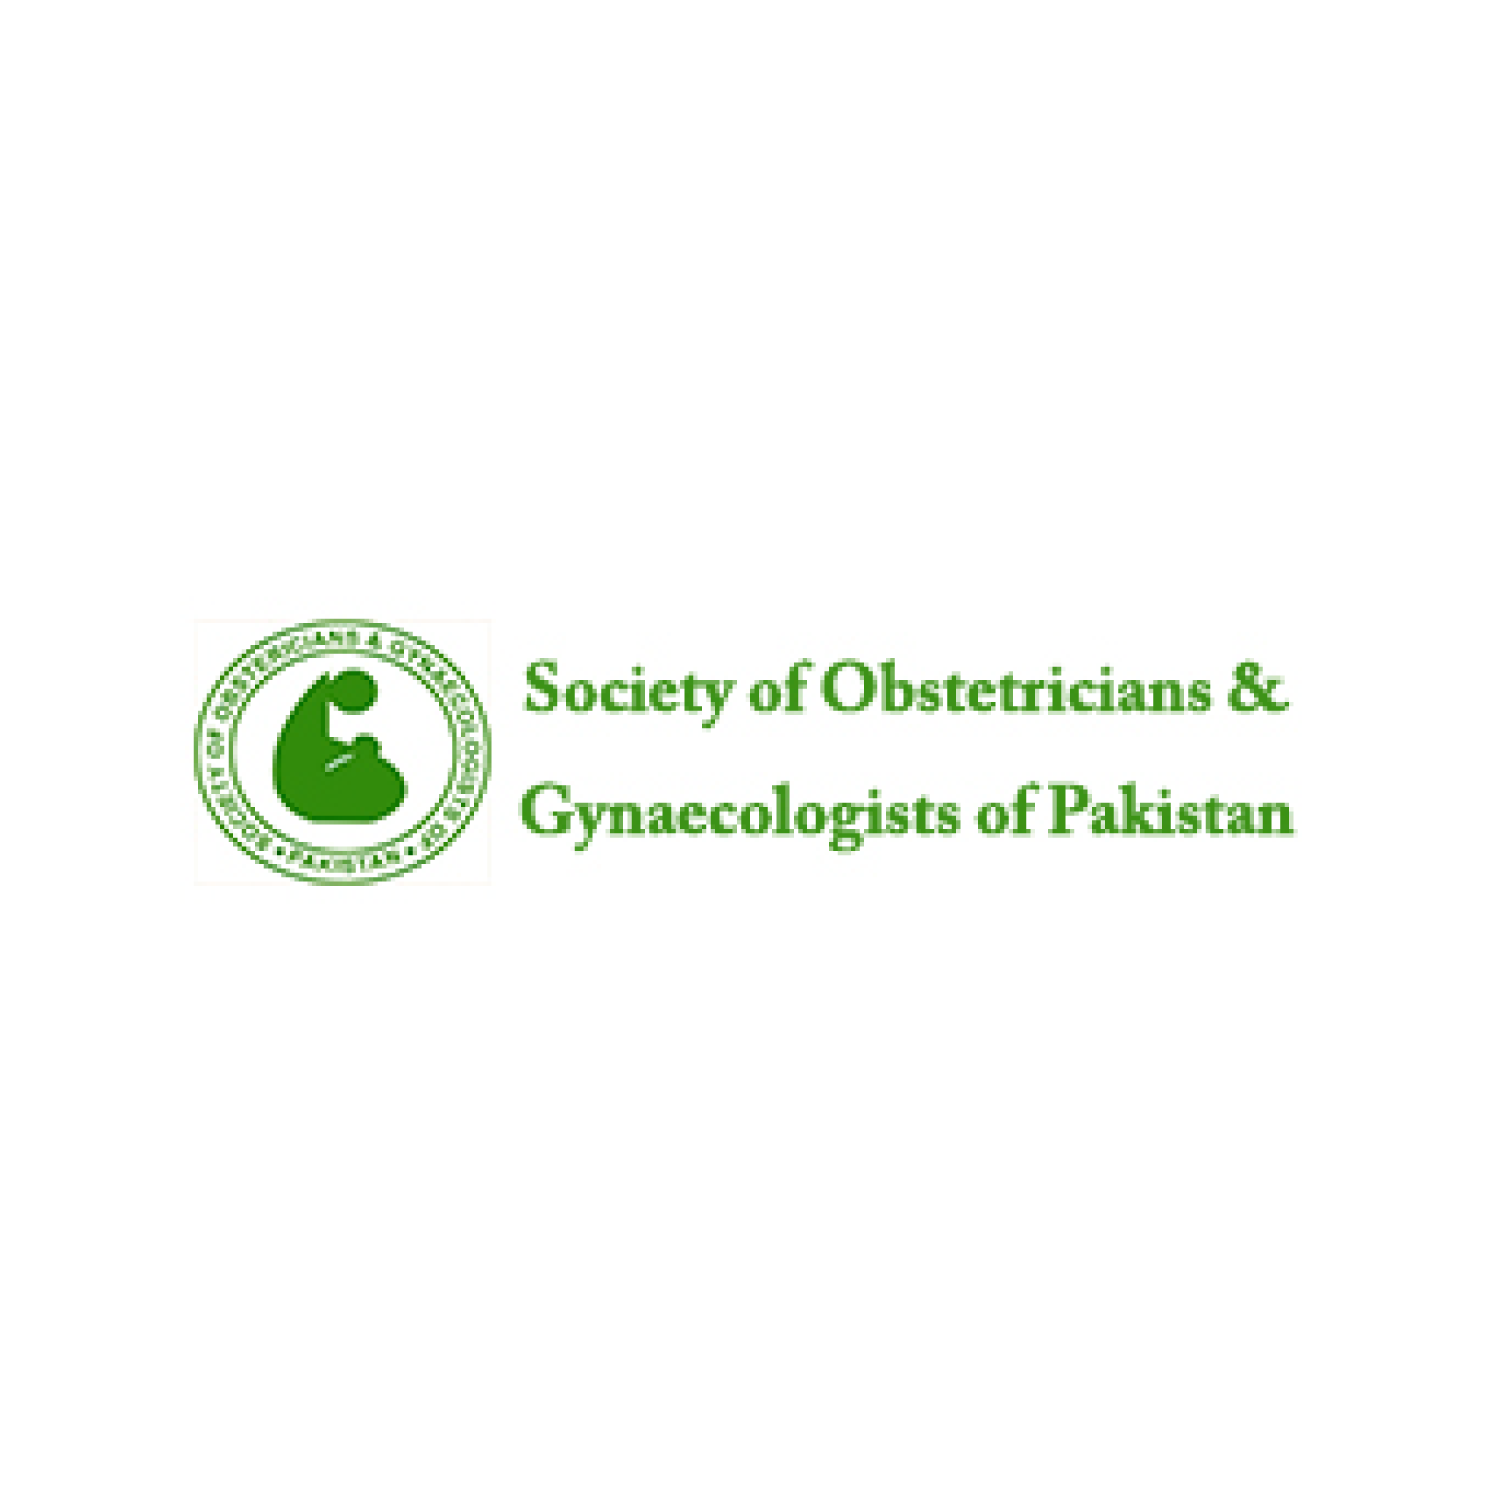 The Society of Obstetricians & Gynecologists of Pakistan (SOGP)